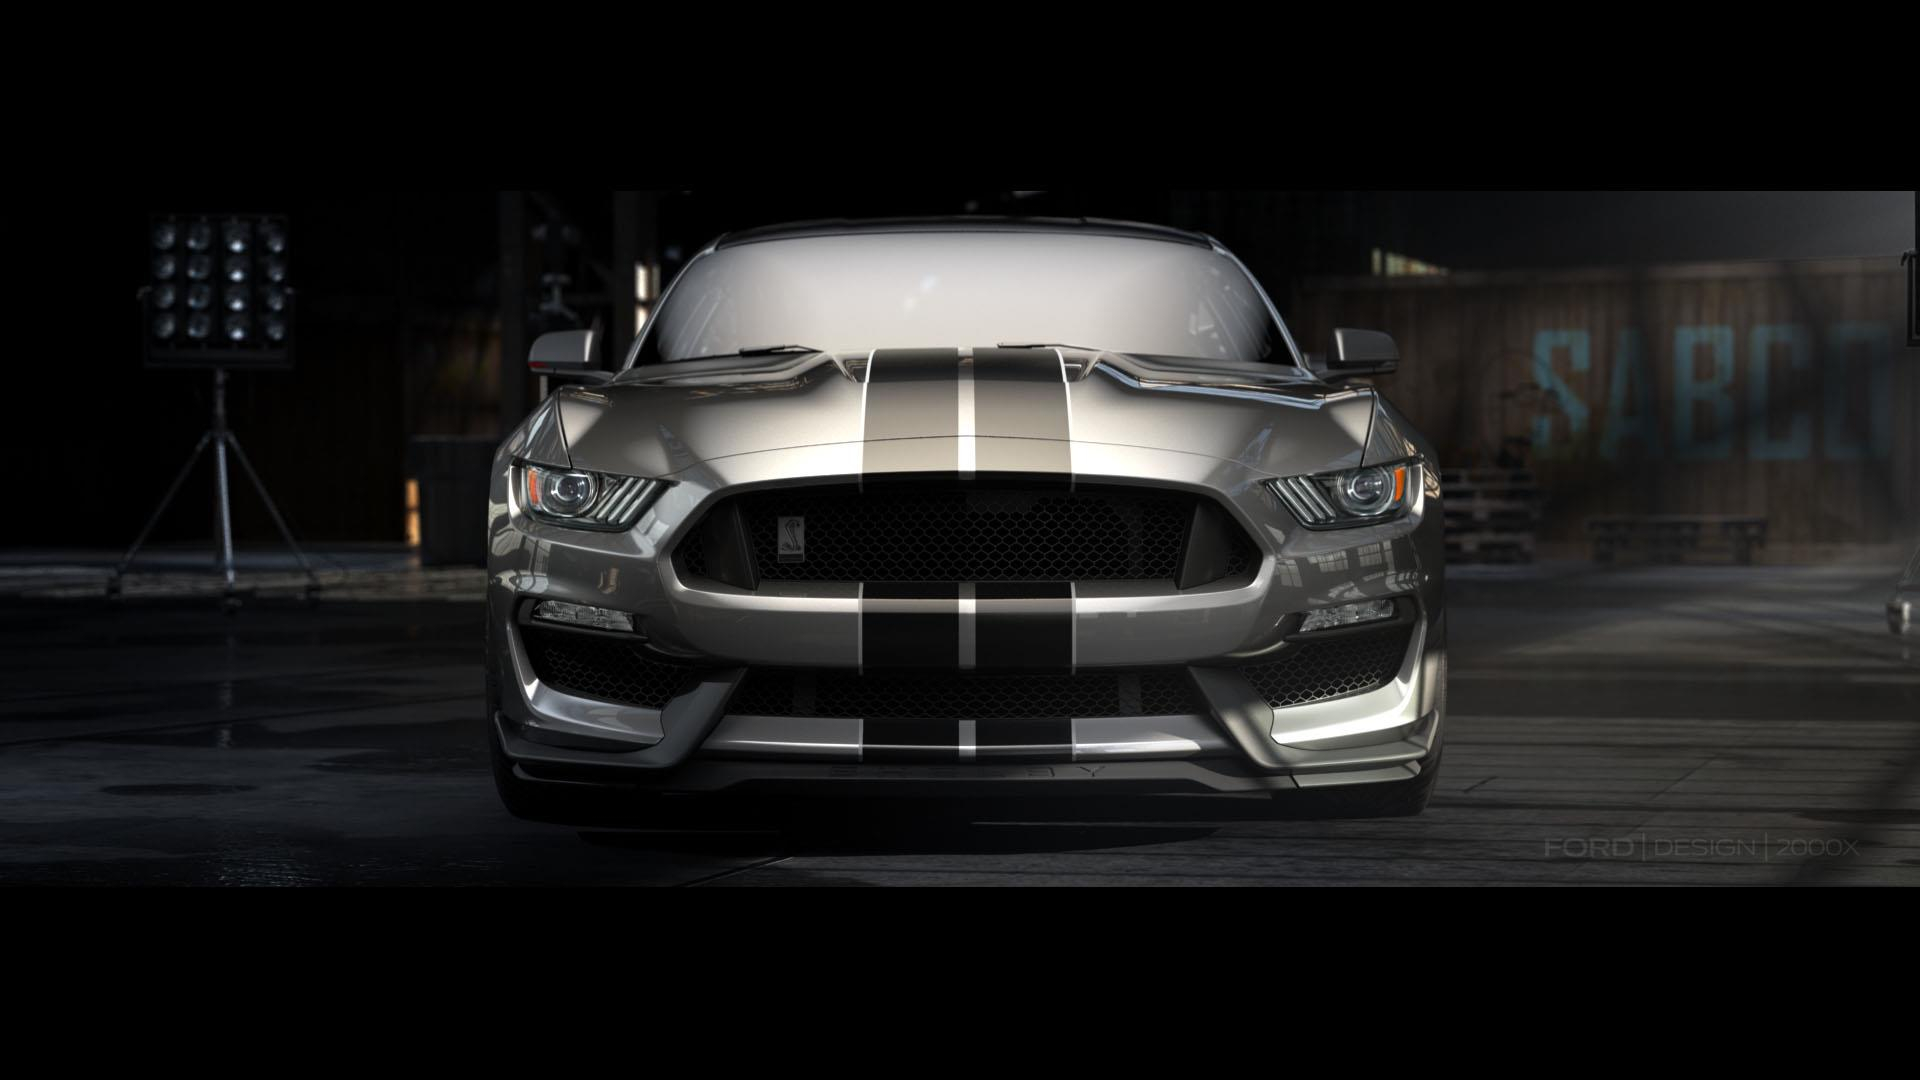 1920x1080 2016 Ford Mustang Shelby GT350 News and Information .com